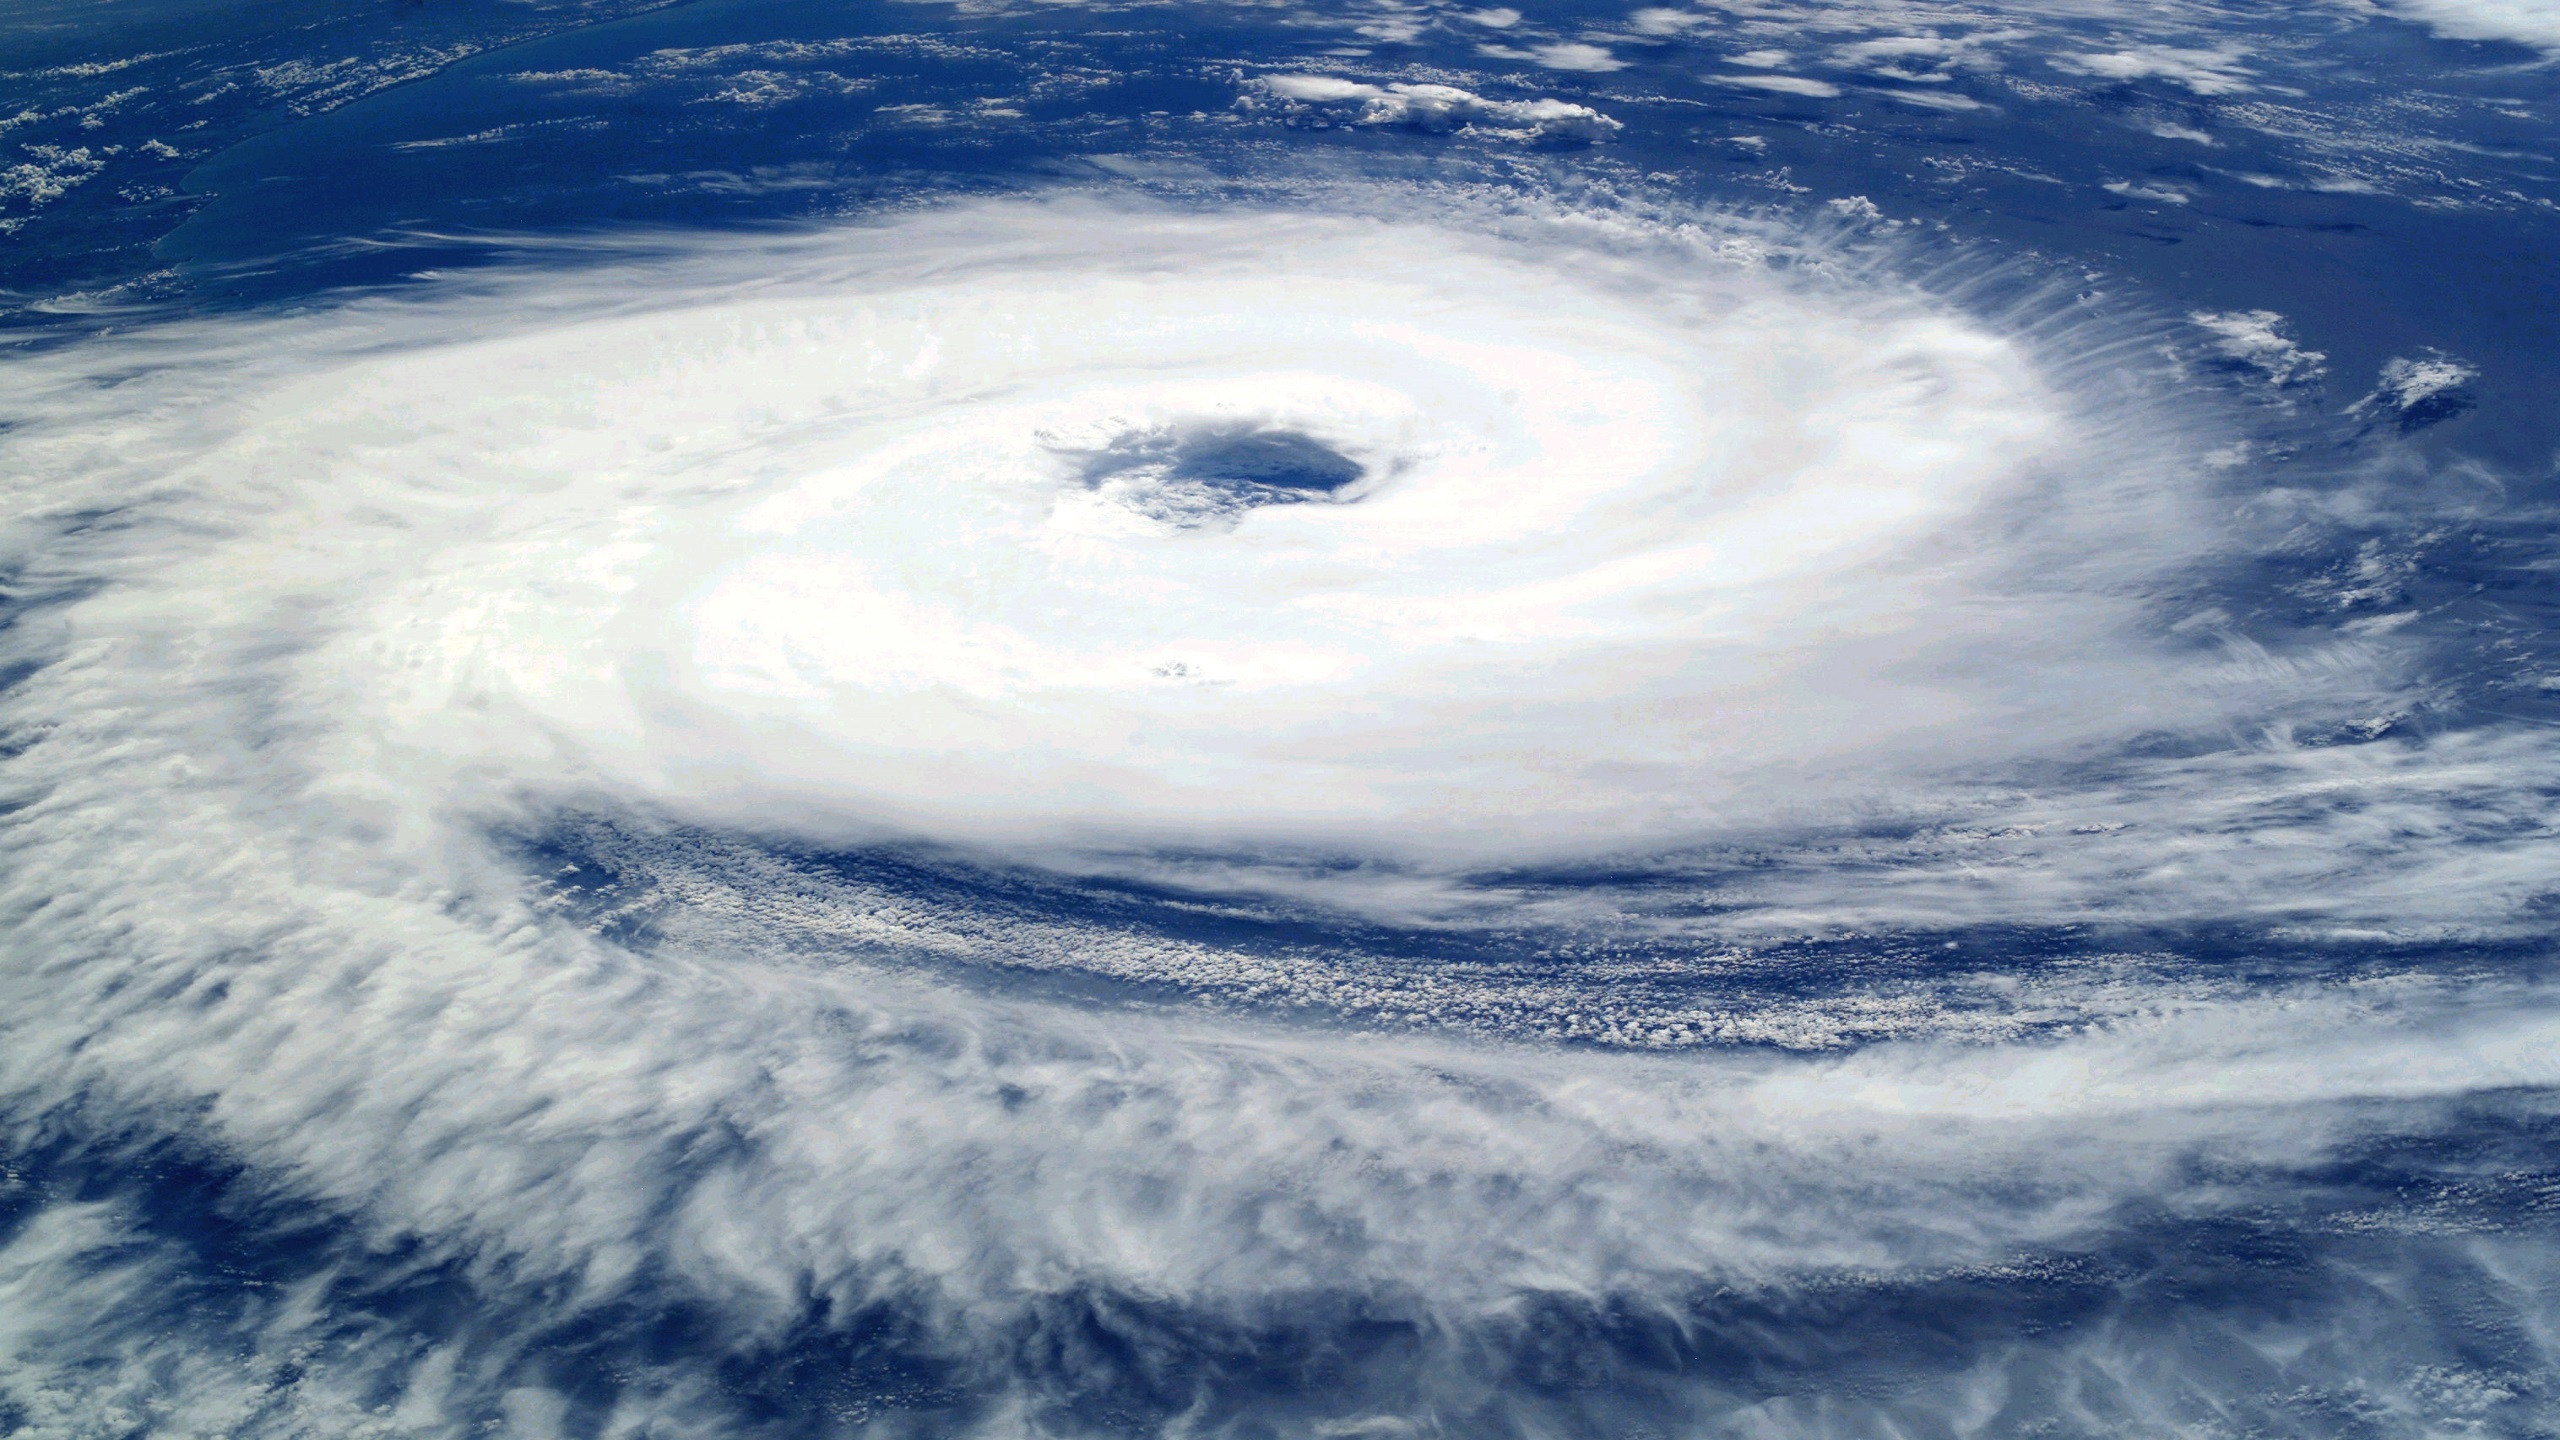 tropical cyclone catarina, march 26th 2004, cyclone for the iss